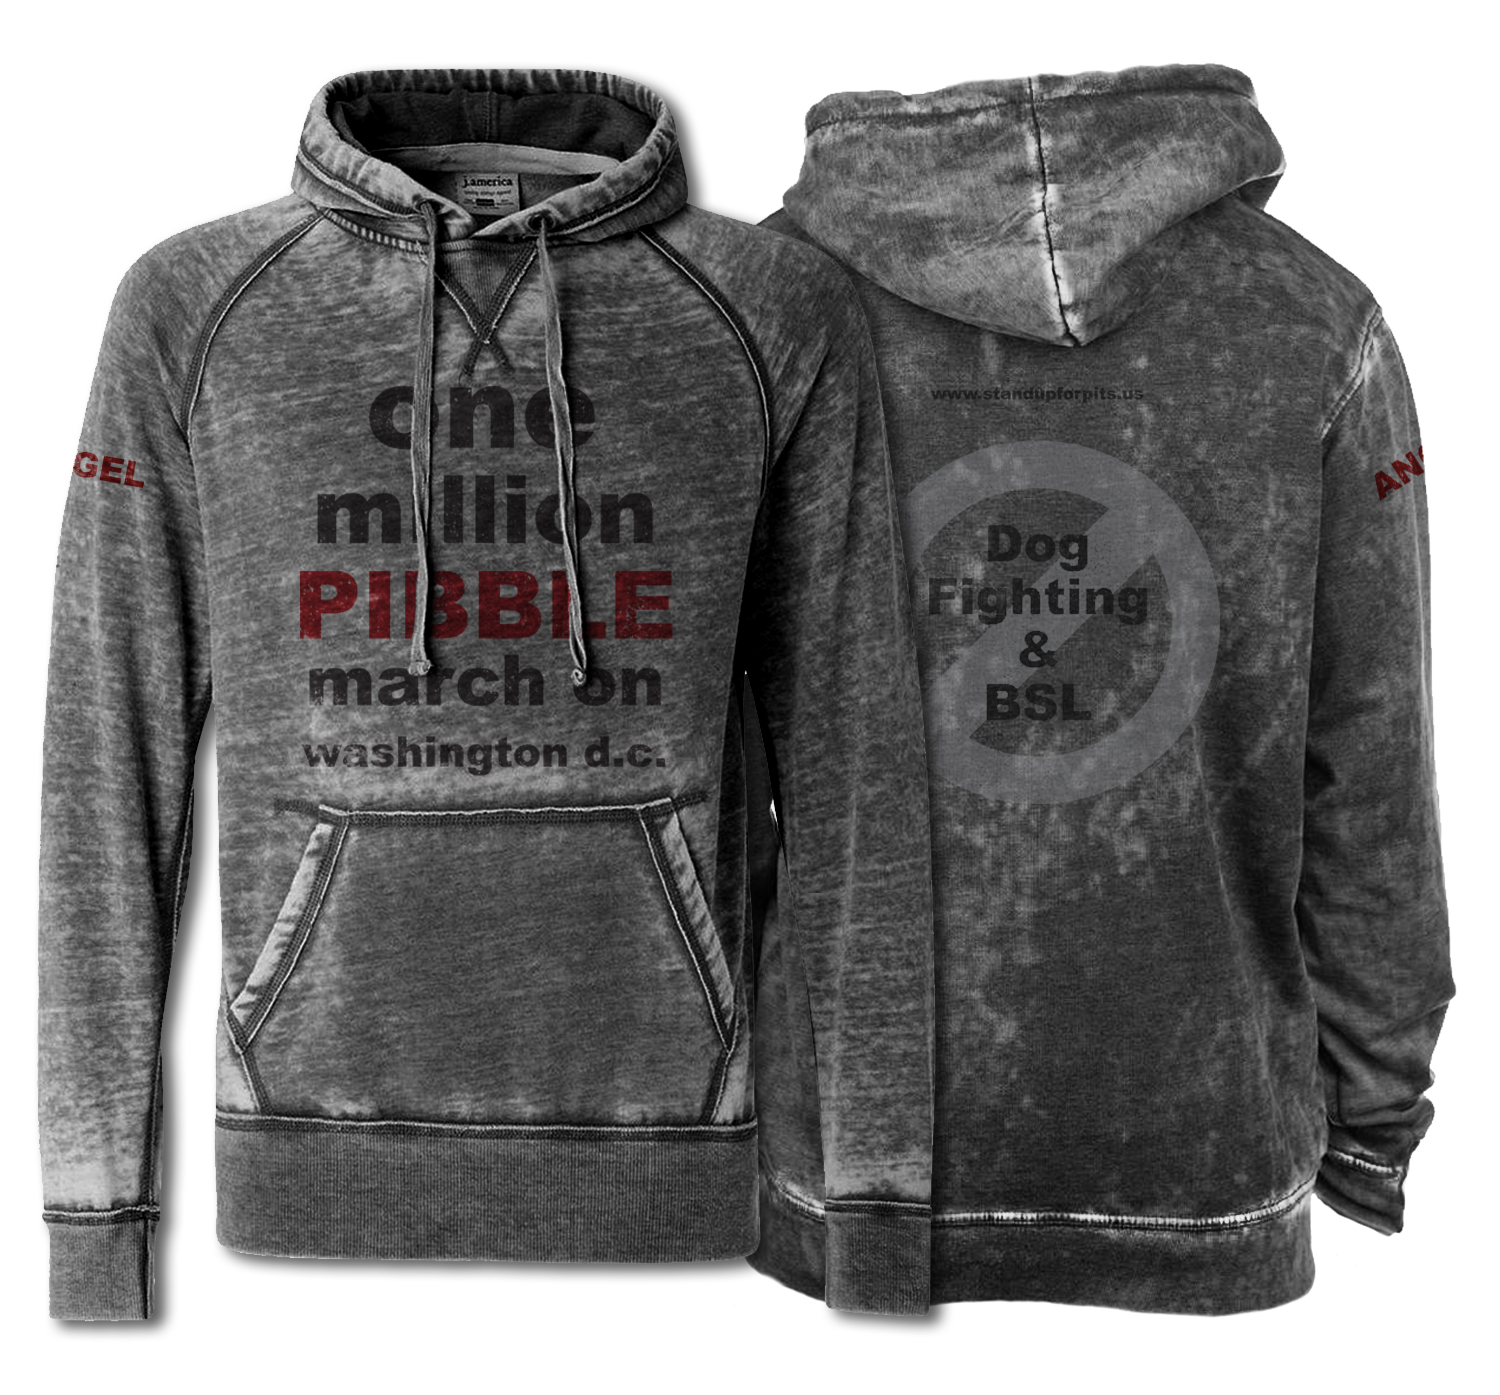 PIBBLE march HOODIES and T-shirts available JANUARY 15th!!!